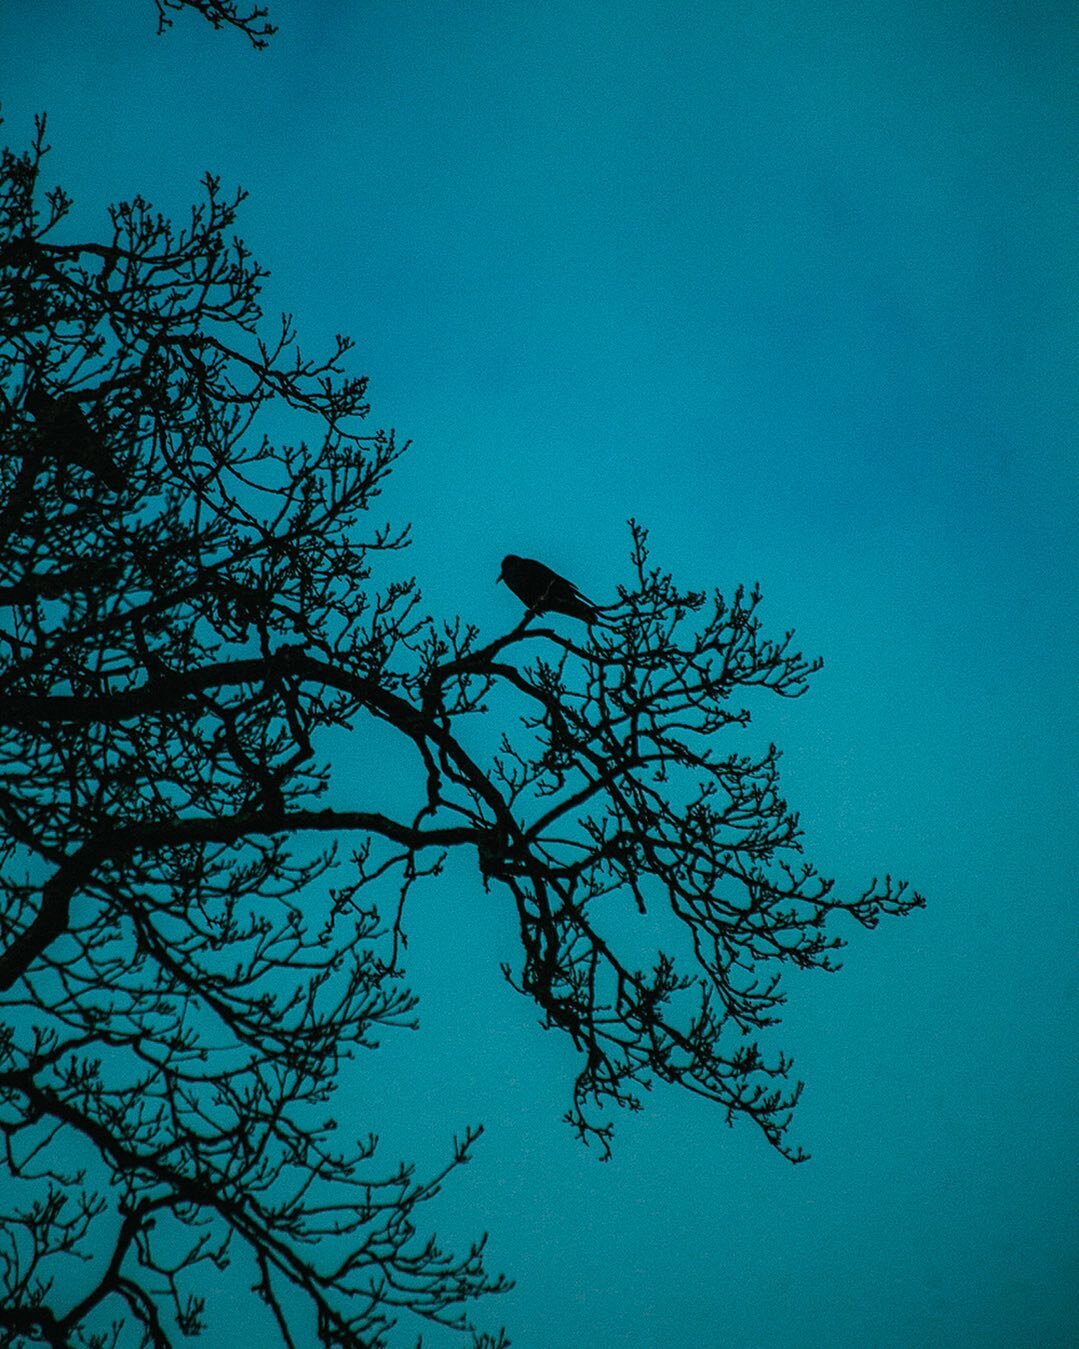 This #Rook looks solitary but is connected to a whole family of friends via the branches of this #oak tree.
-
#DevonLife
#DevonCoast
#DevonArtist